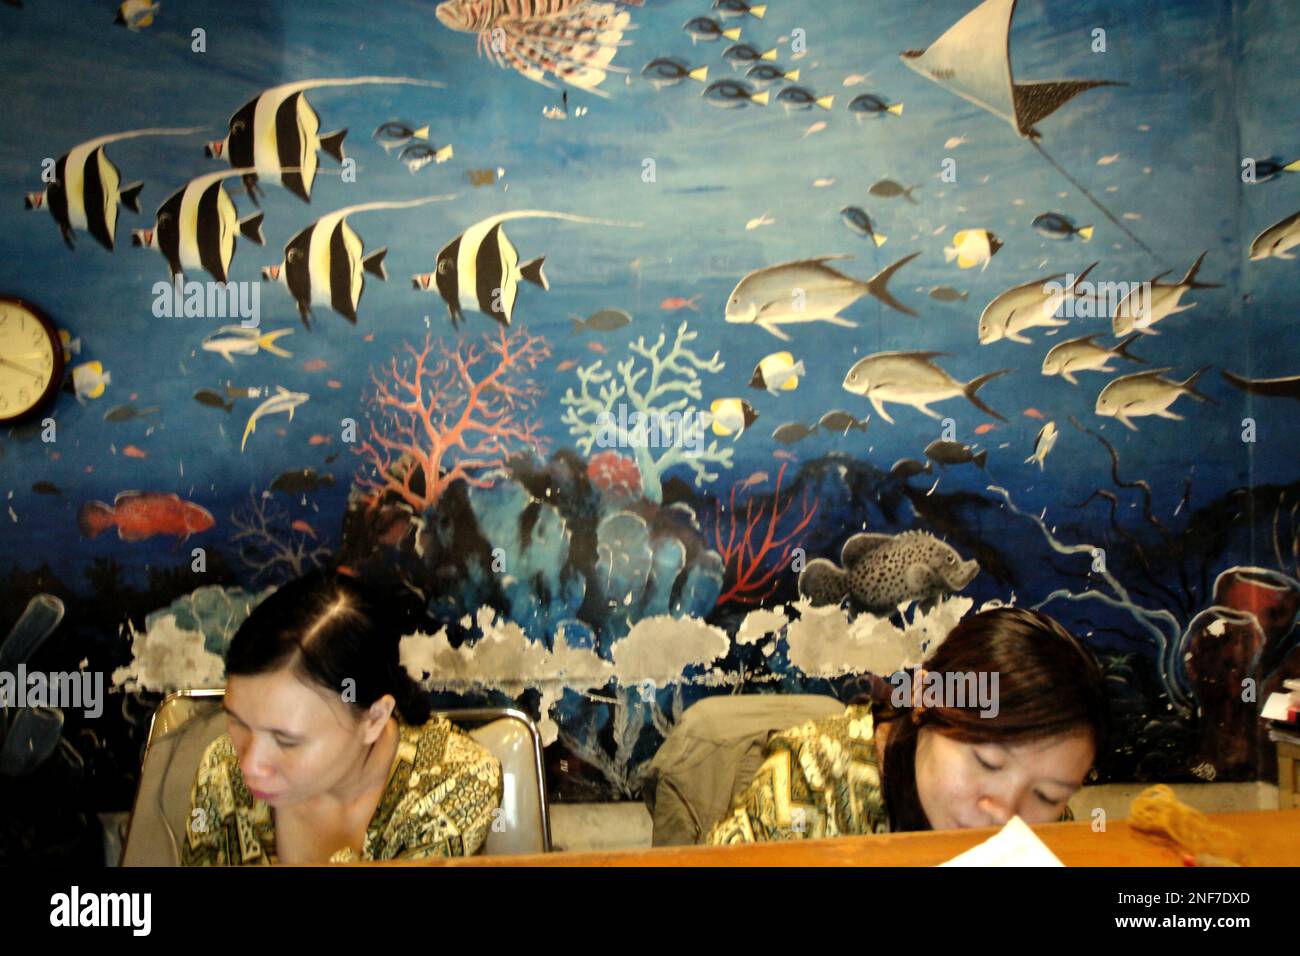 Receptionists respond to a query of a customer at the front desk of a seafood restaurant in Manado, a coastal city and the capital of North Sulawesi province of Indonesia. According to FAO in their latest report called The State of World Fisheries and Aquaculture 2022, Indonesia is the third largest producer of world's fisheries and aquaculture production of aquatic animals. Five countries—China, India, Indonesia, Vietnam, and Peru—are responsible for about 58 percent of the world's production. Indonesia is also one of the countries where aquatic foods contribute half or more of total... Stock Photo